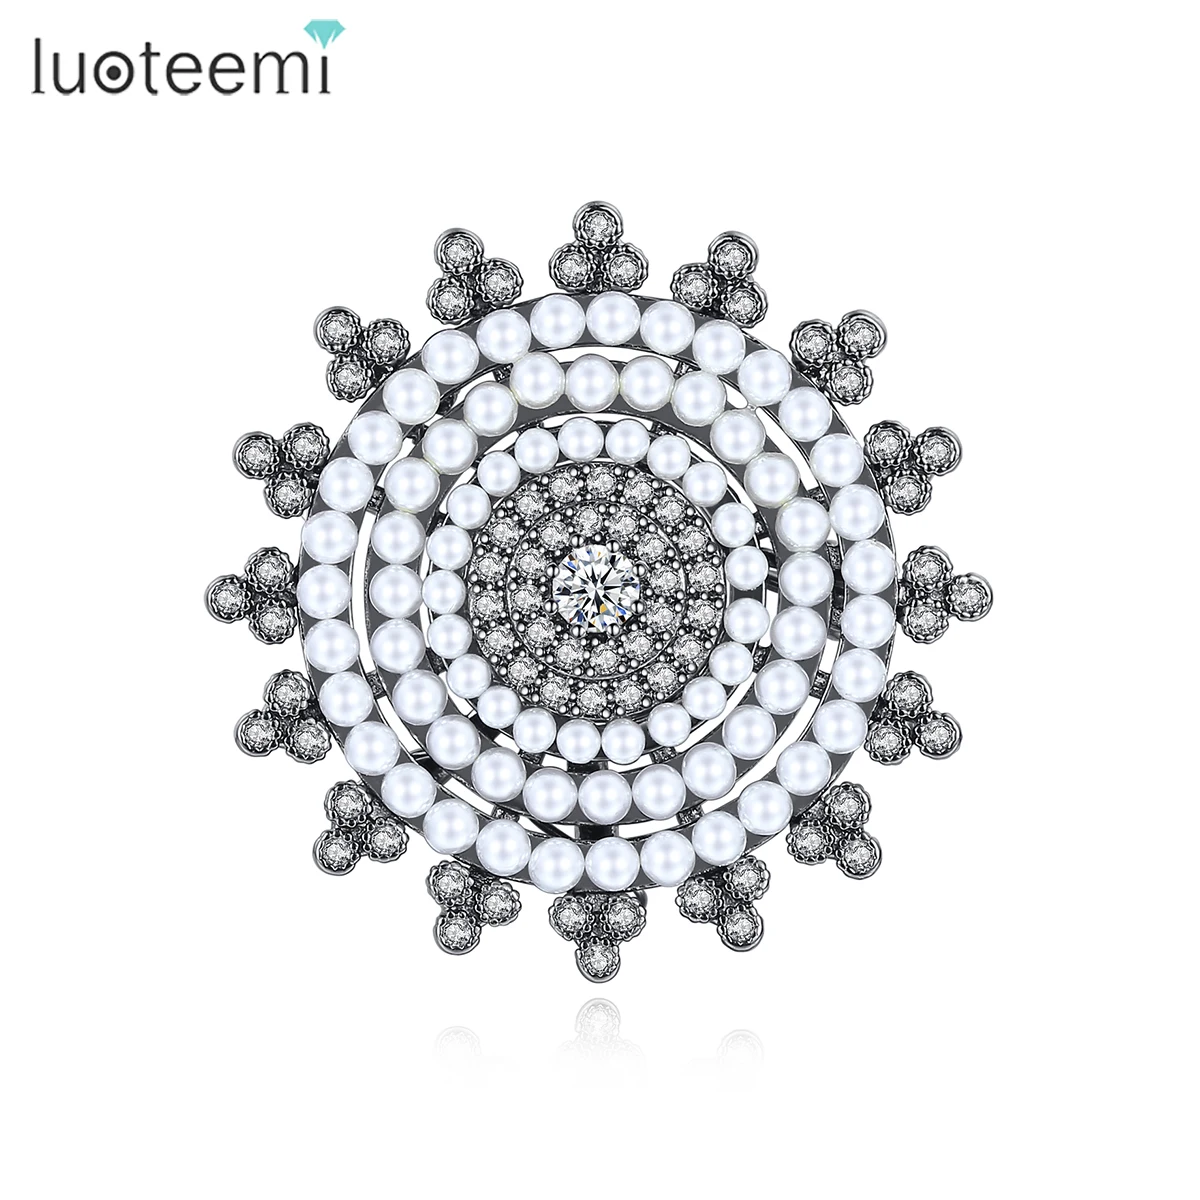 

LUOTEEMI Famous Brand Fashion Big Round Snowflake Brooches Multiple Shell Pearls Christmas Gifts for Friends Winter Sweet Gifts